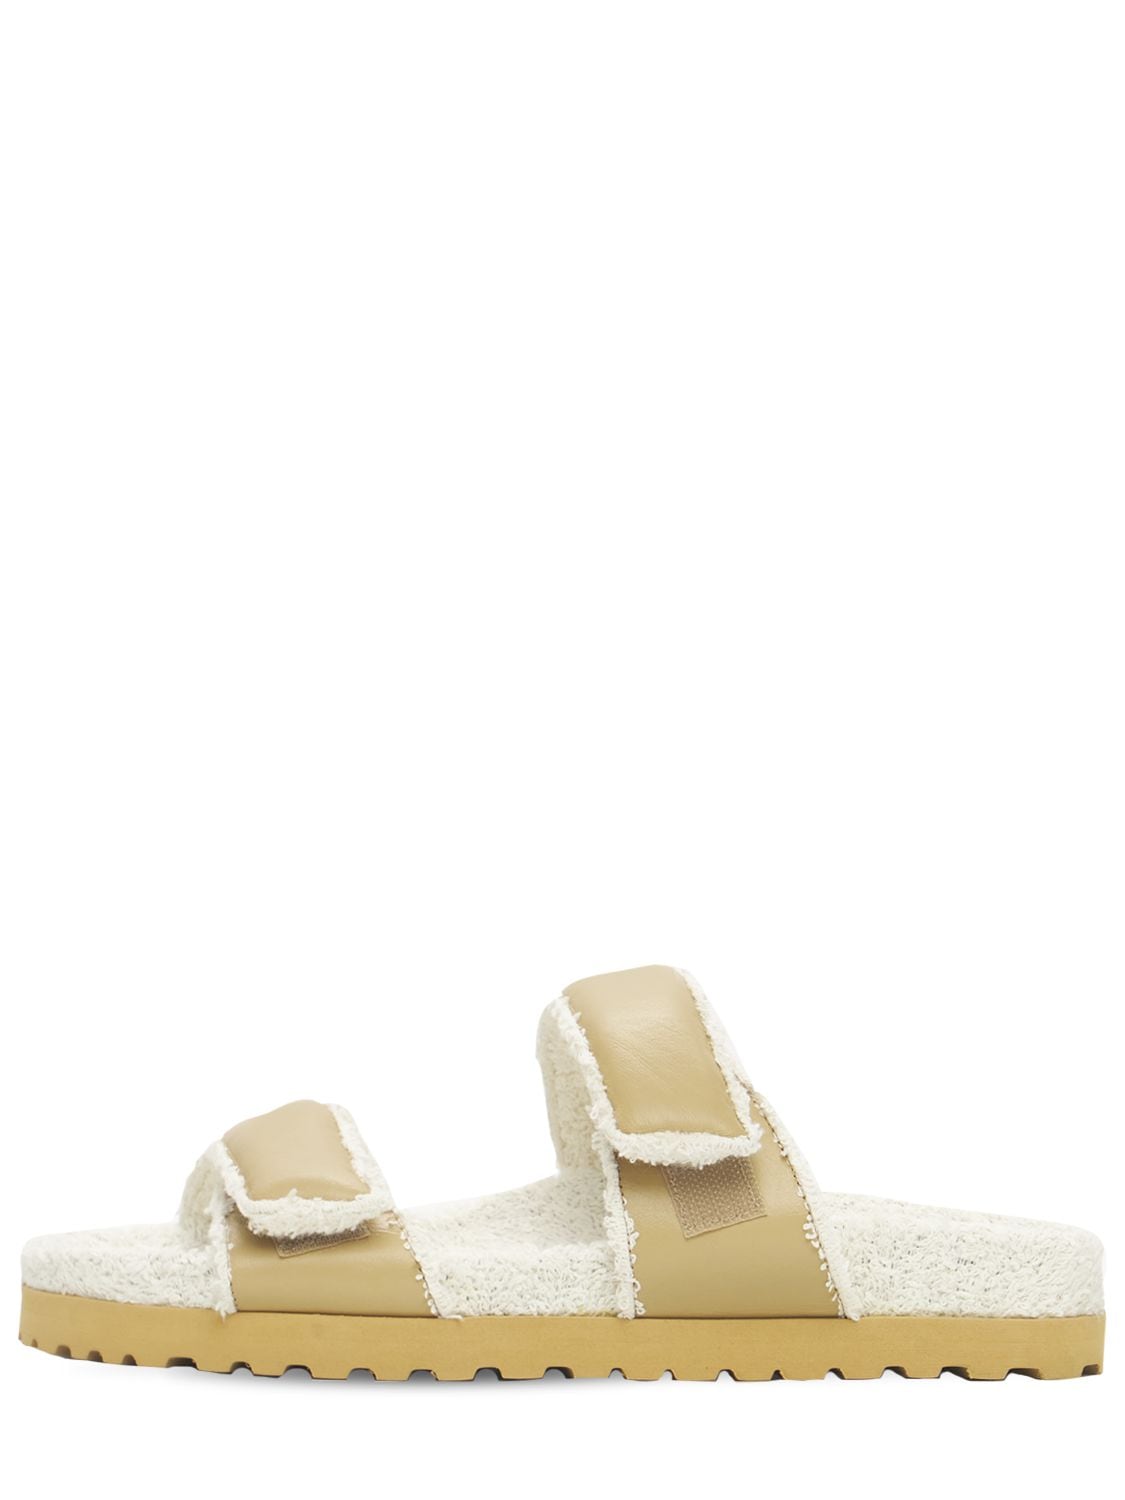 Gia X Pernille Teisbaek 20mm Leather & Terry Cloth Sandals In Beige,off-white